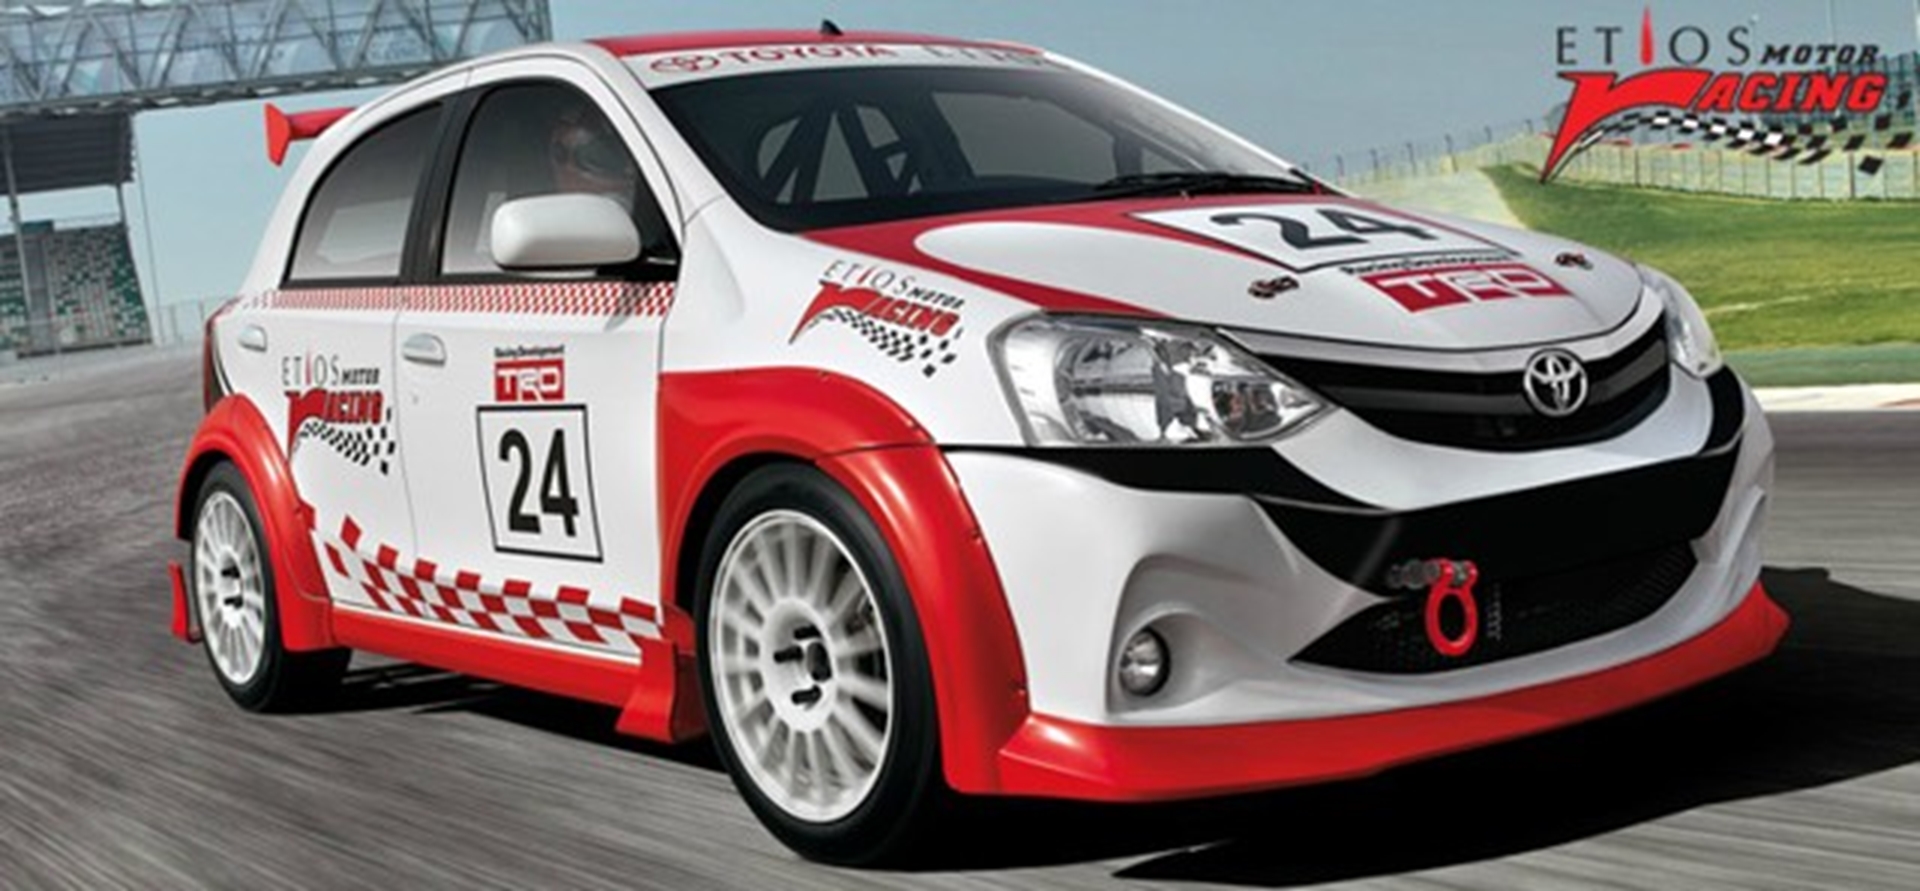 Toyota Launches Etios Motor Racing Trophy– A One Make Racing Series